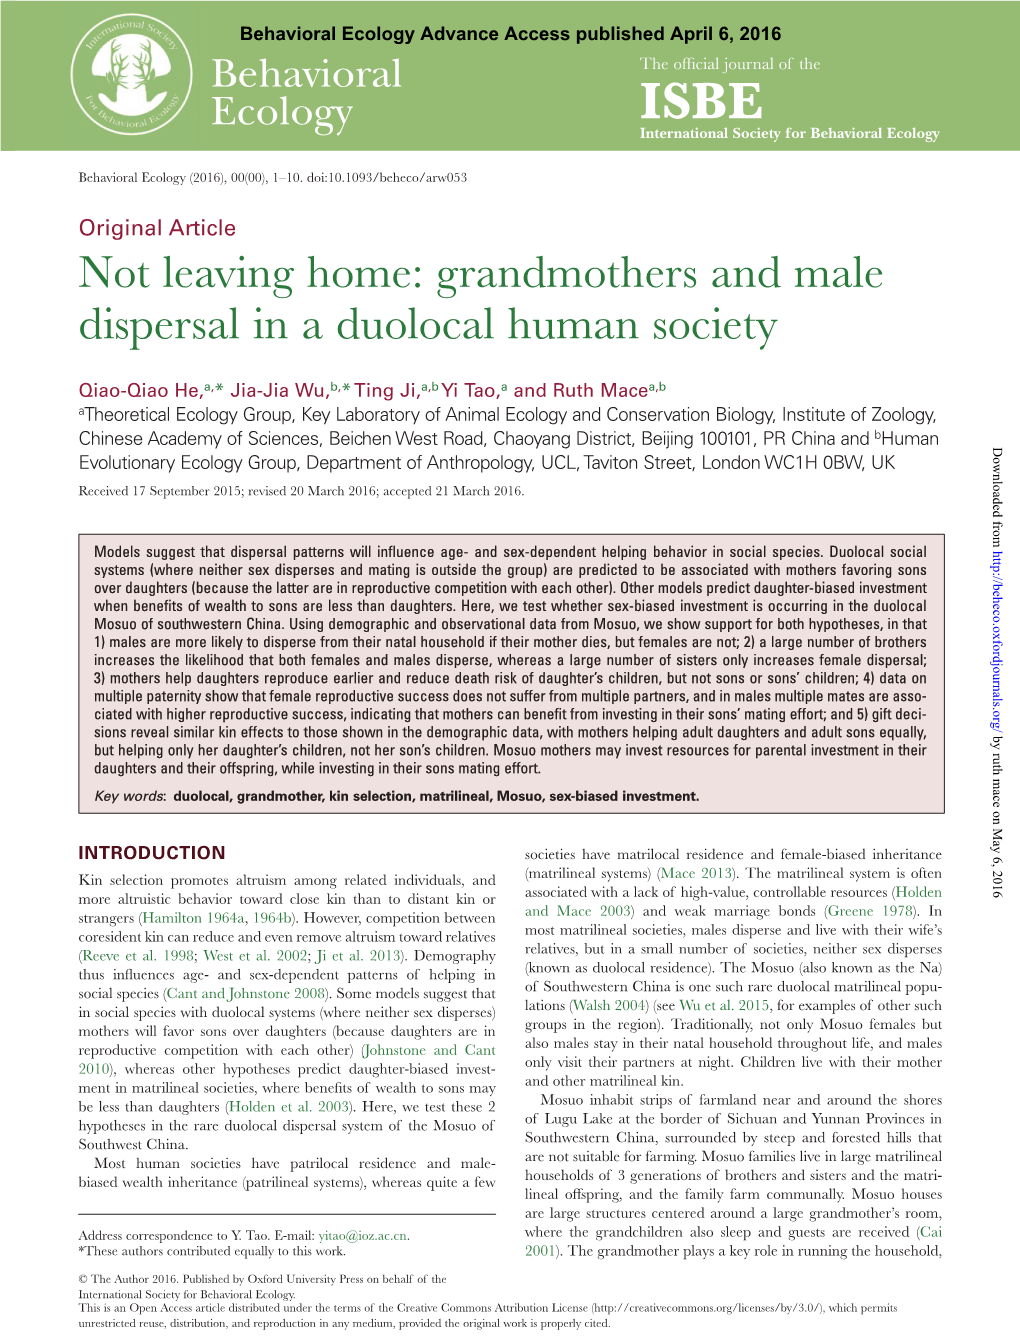 Not Leaving Home: Grandmothers and Male Dispersal in a Duolocal Human Society